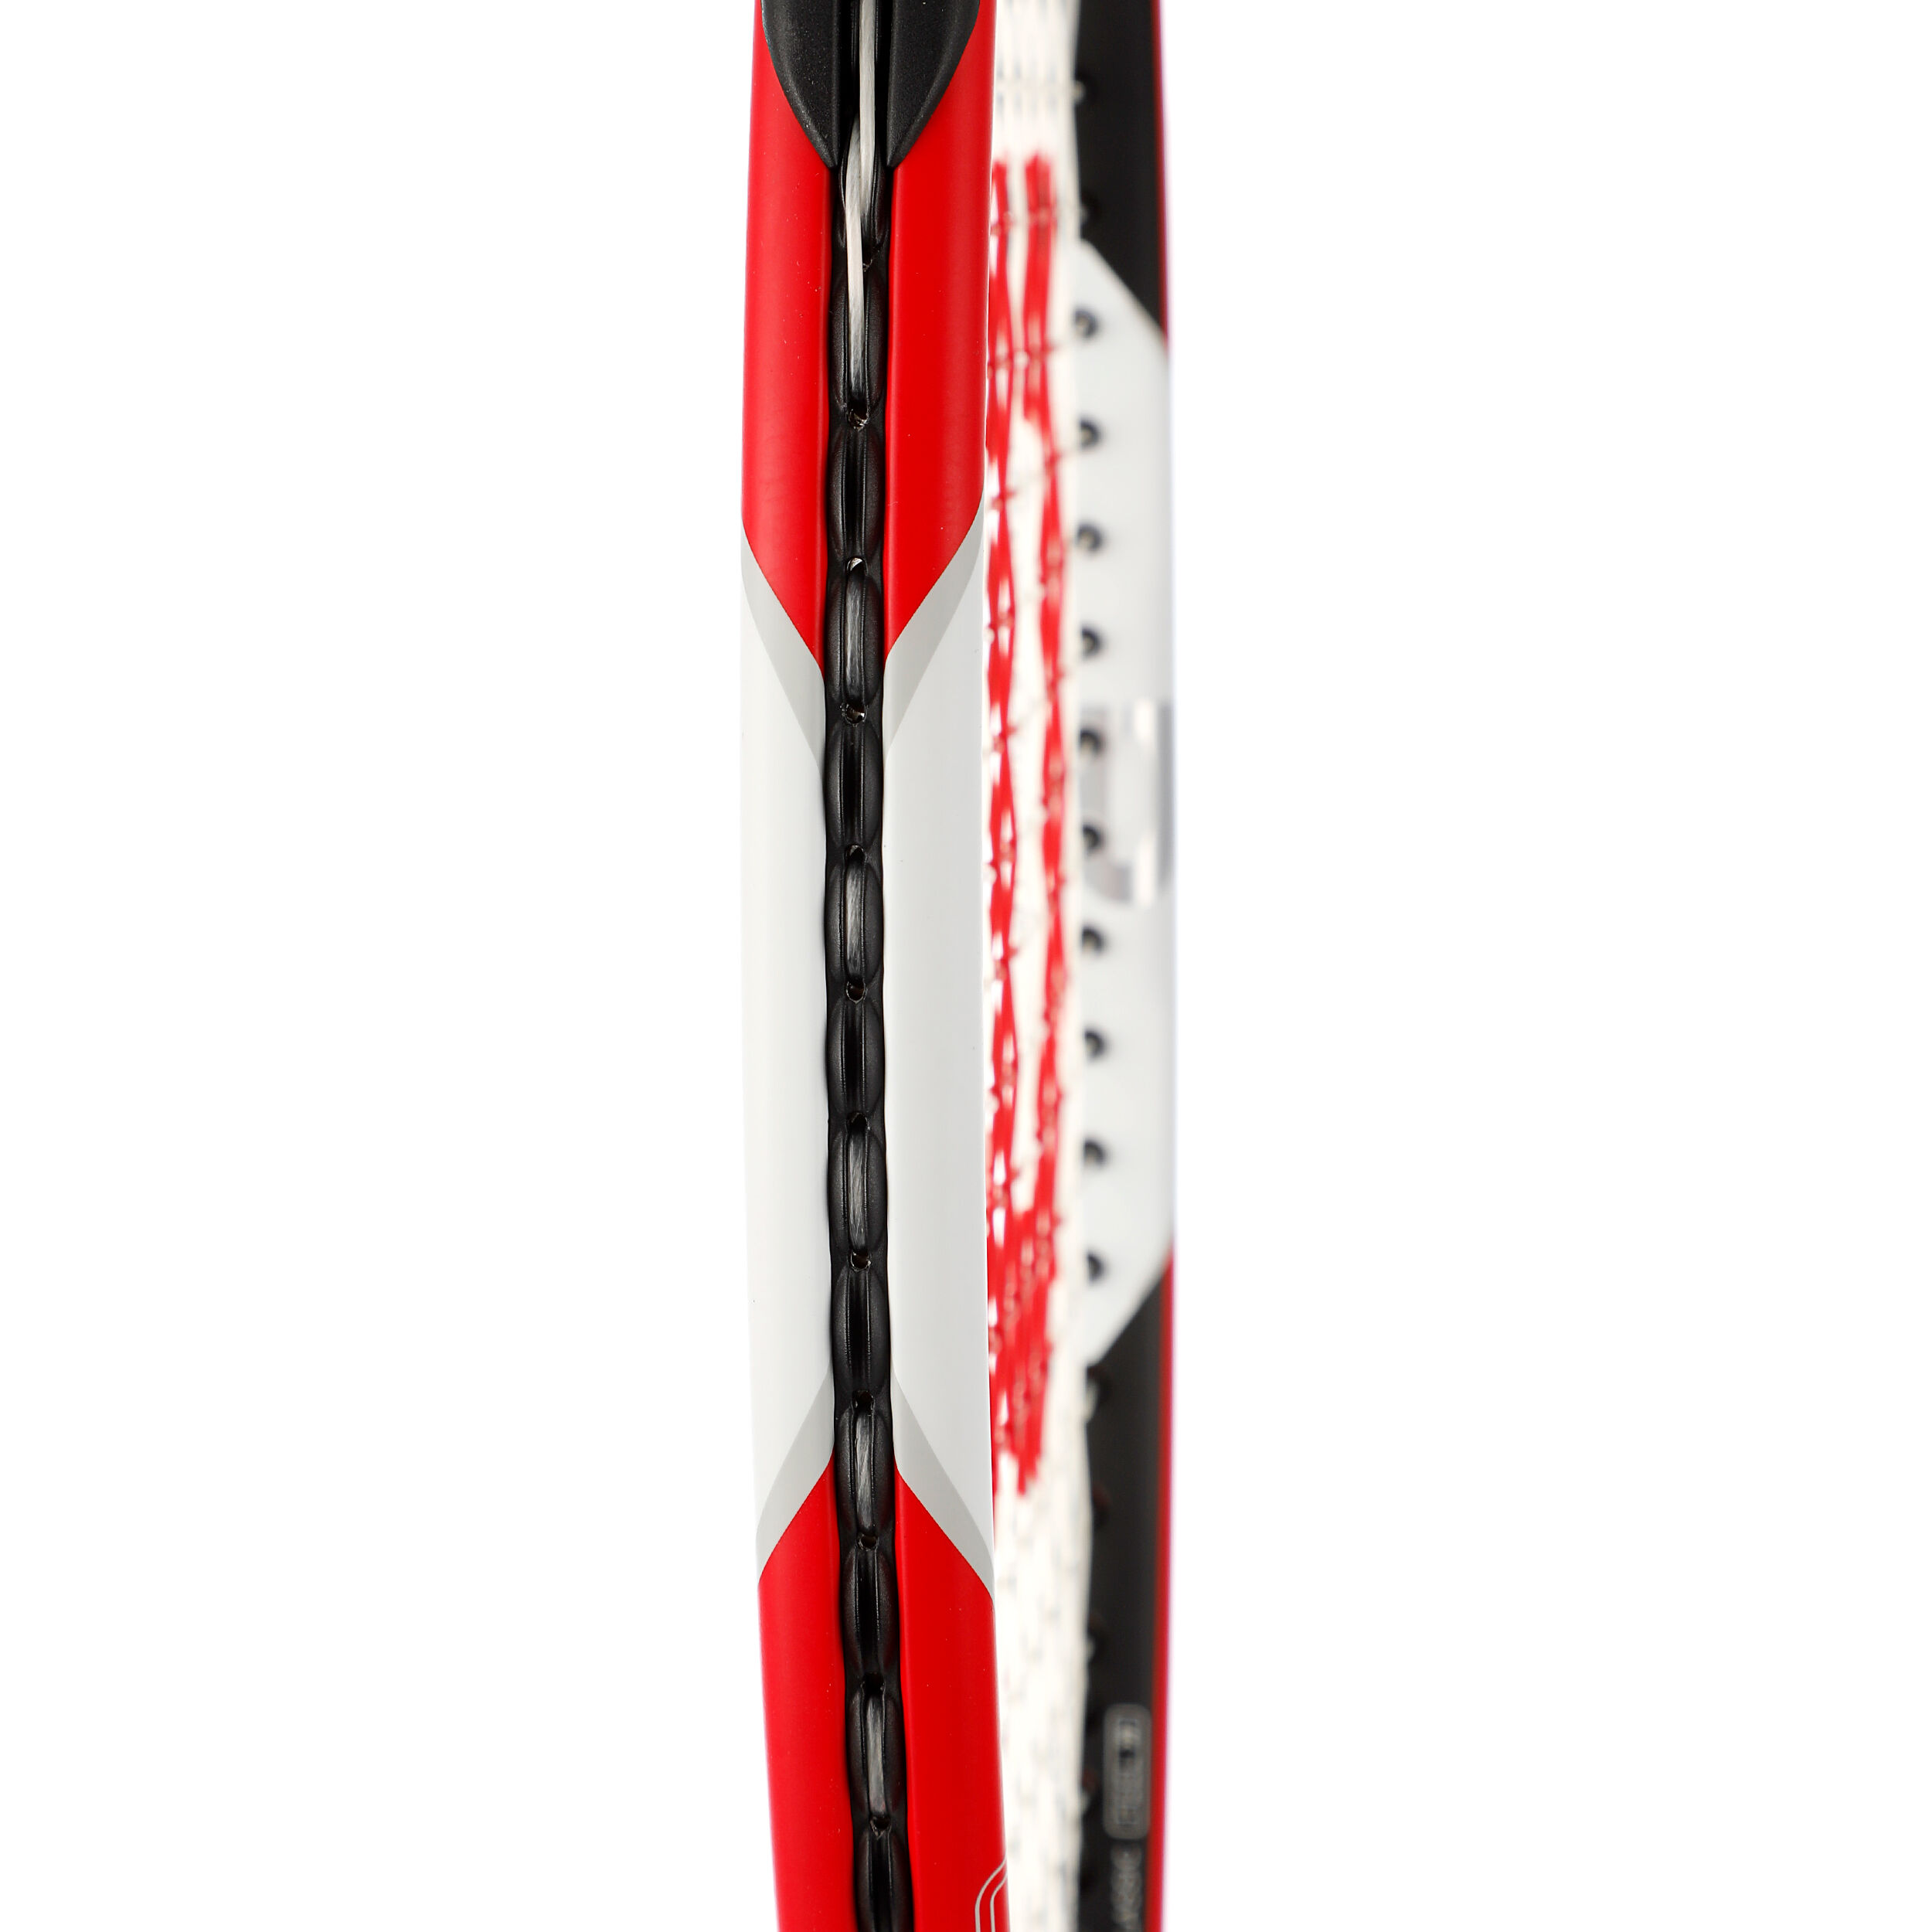 Buy Wilson Six.One Team 95 18x20 Allround Racket (Special Edition